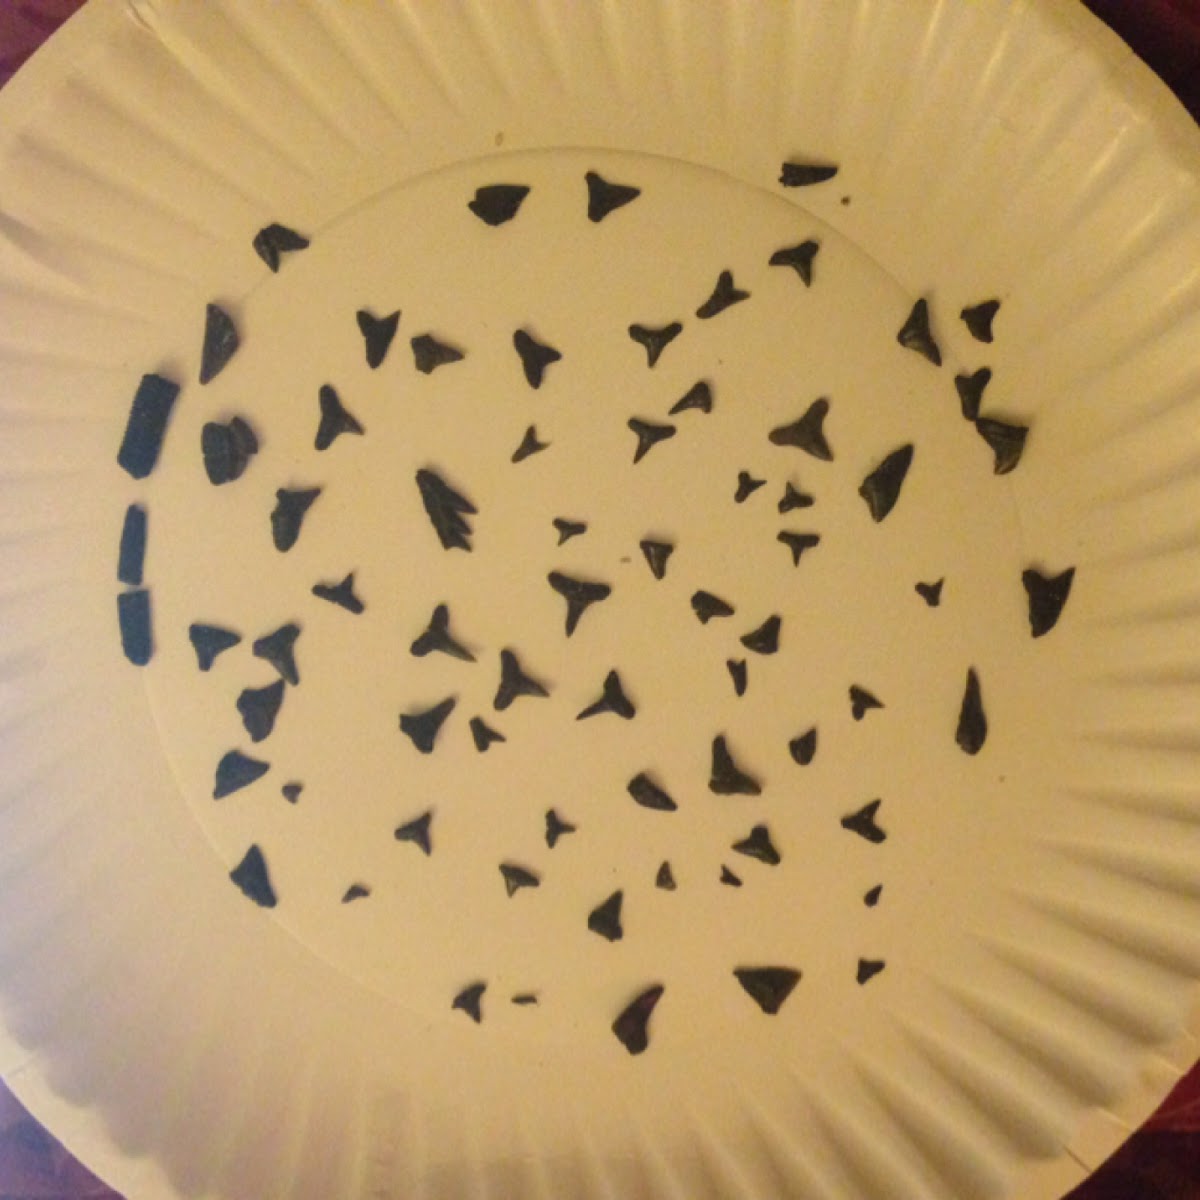 Shark teeth finds from today's beach trip. 9 o'clock could be some stingray barbs. I found something else really cool that looked like a vertebrae or something strange. Will see if I can get a decent pic if it. Lots of little teeth! Fun times.  :)